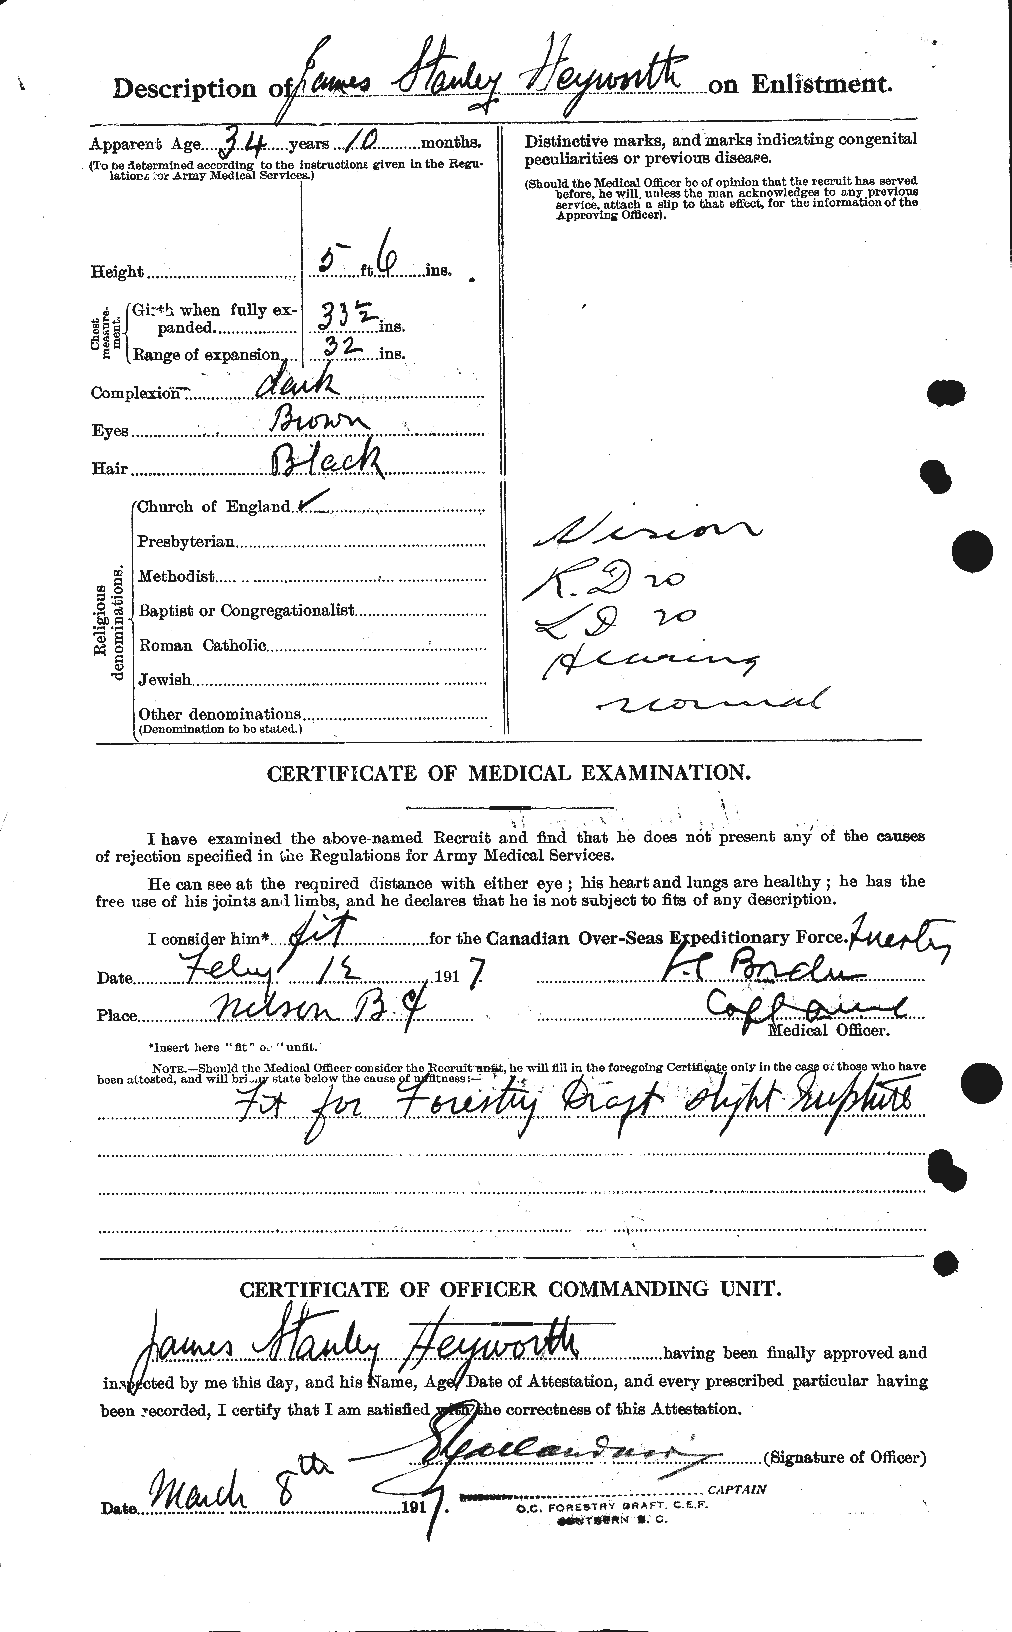 Personnel Records of the First World War - CEF 396138b